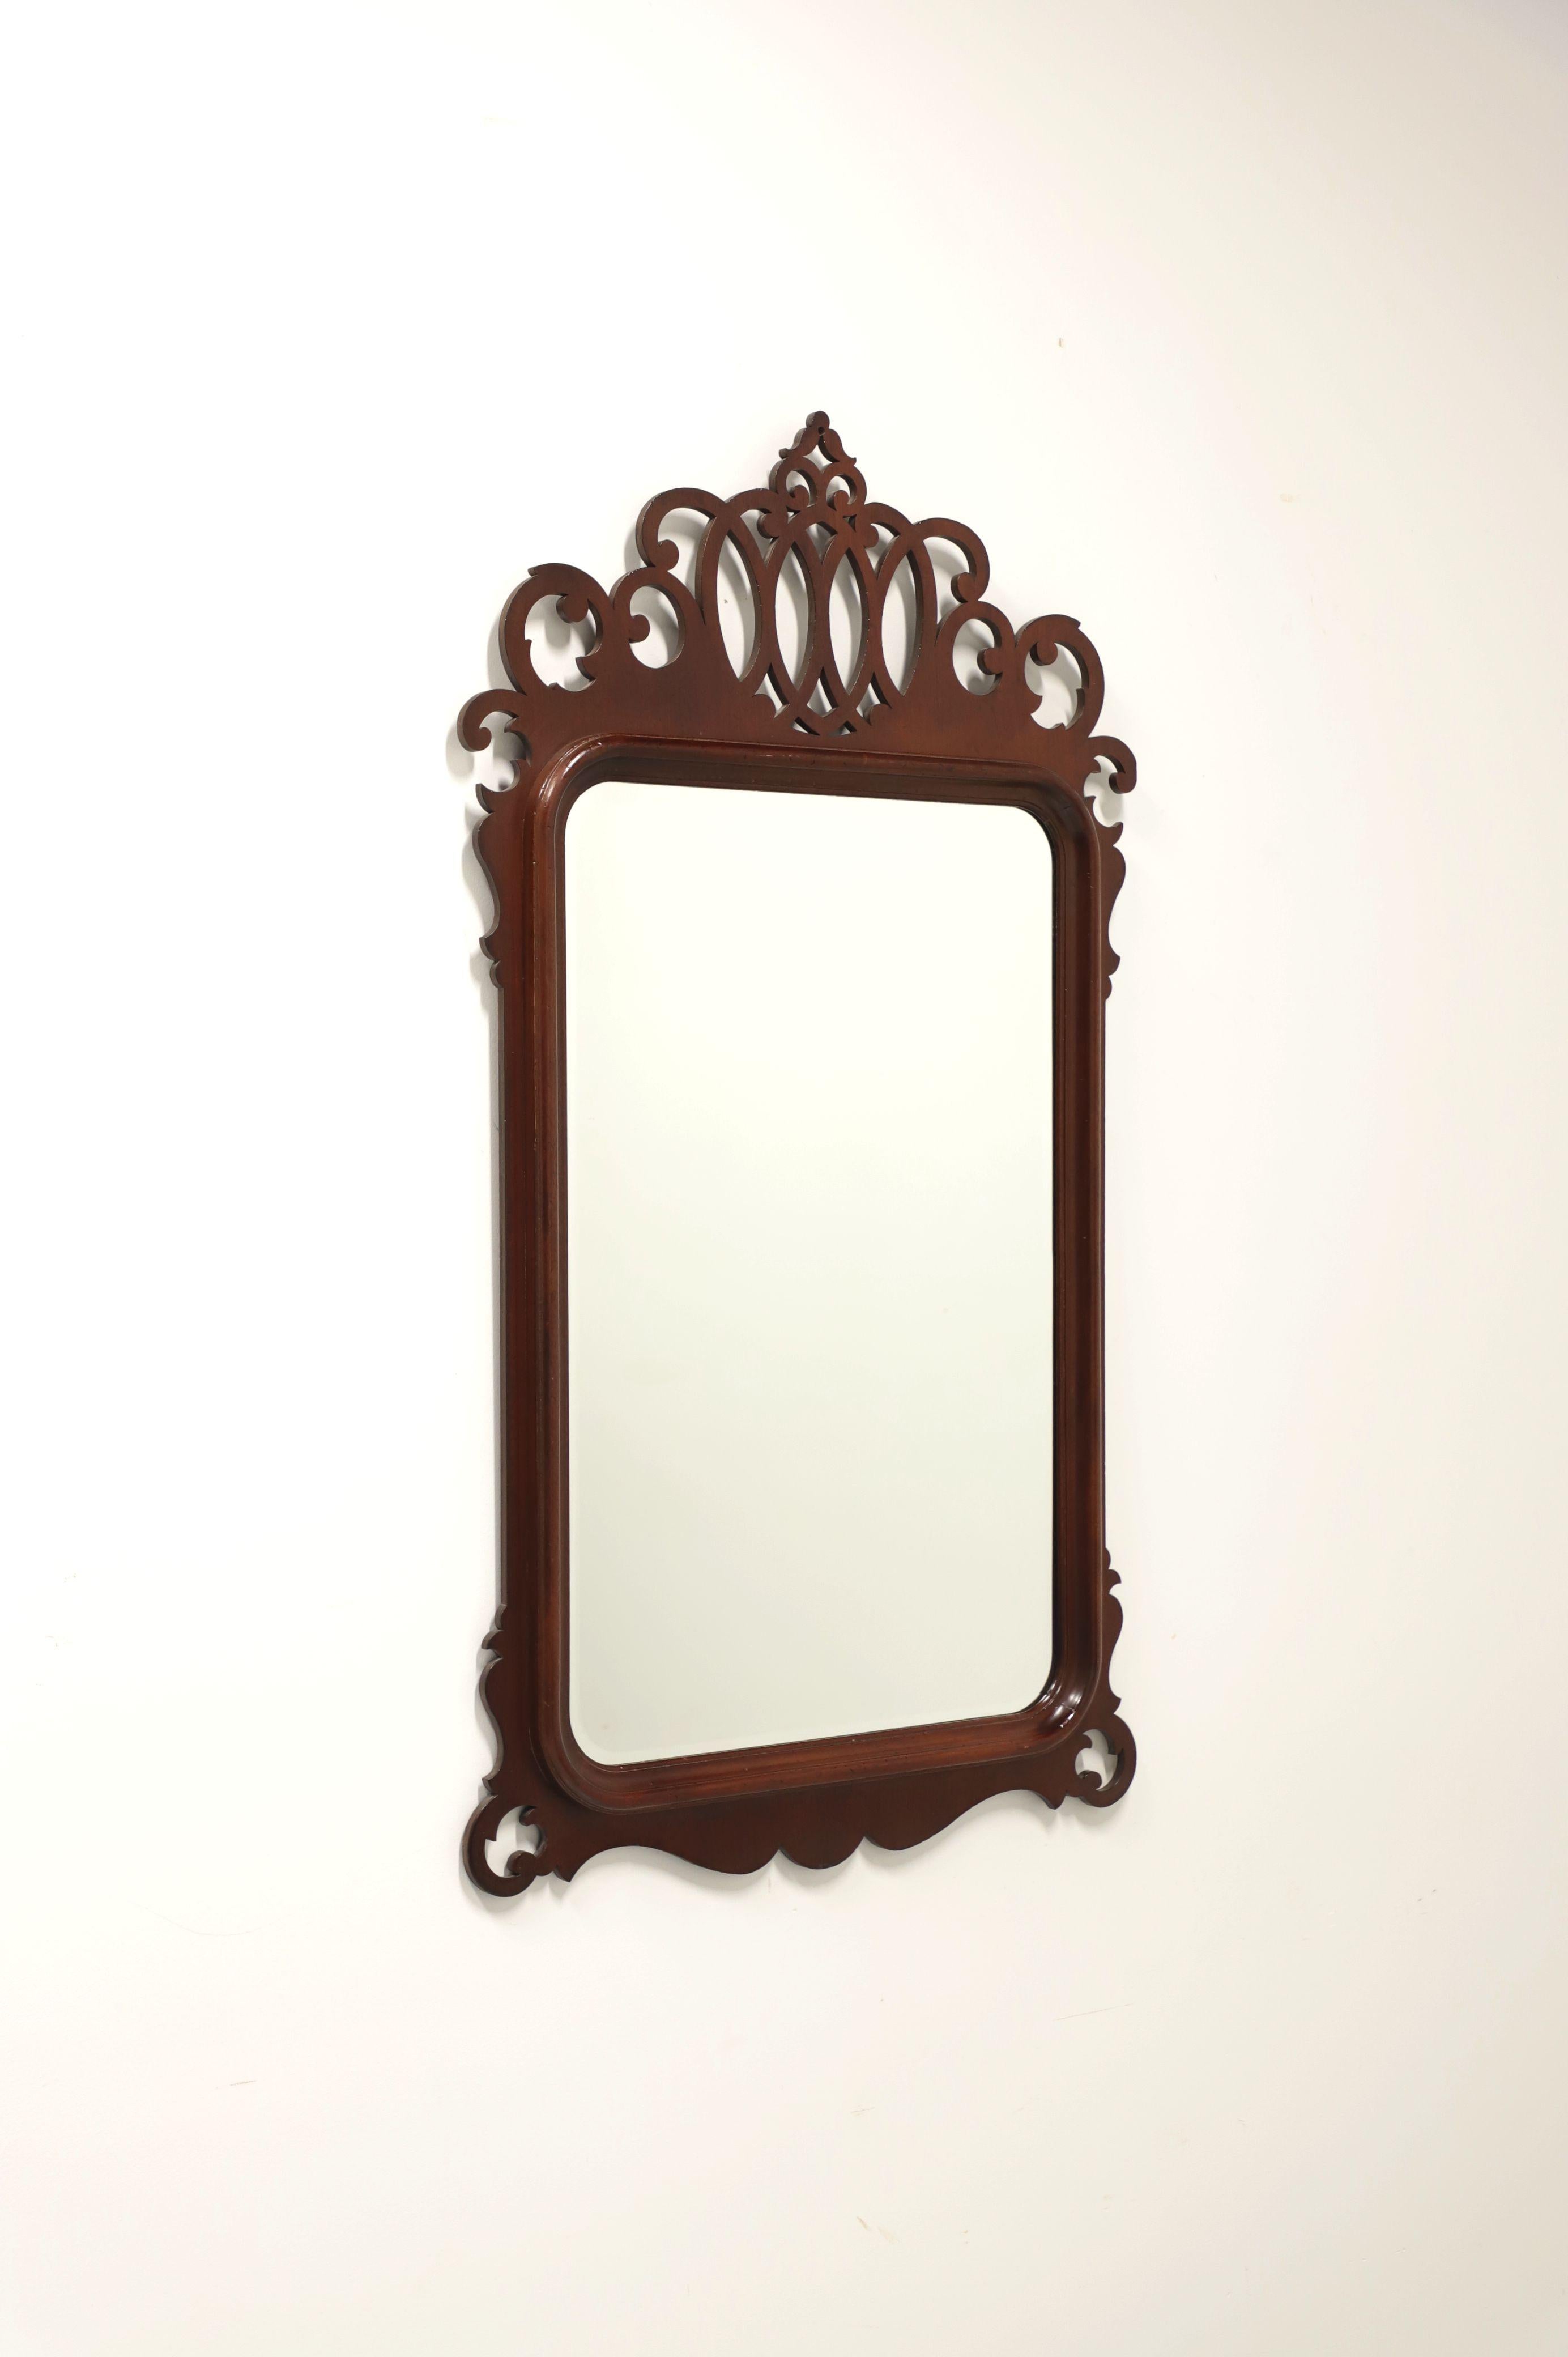 A large Chippendale style wall mirror by Lexington Furniture. Bevel edge mirrored glass, mahogany frame with decoratively carved fretwork pediment to top and decorative carving to bottom. Made in the USA, in the early 21st Century.

Style #: